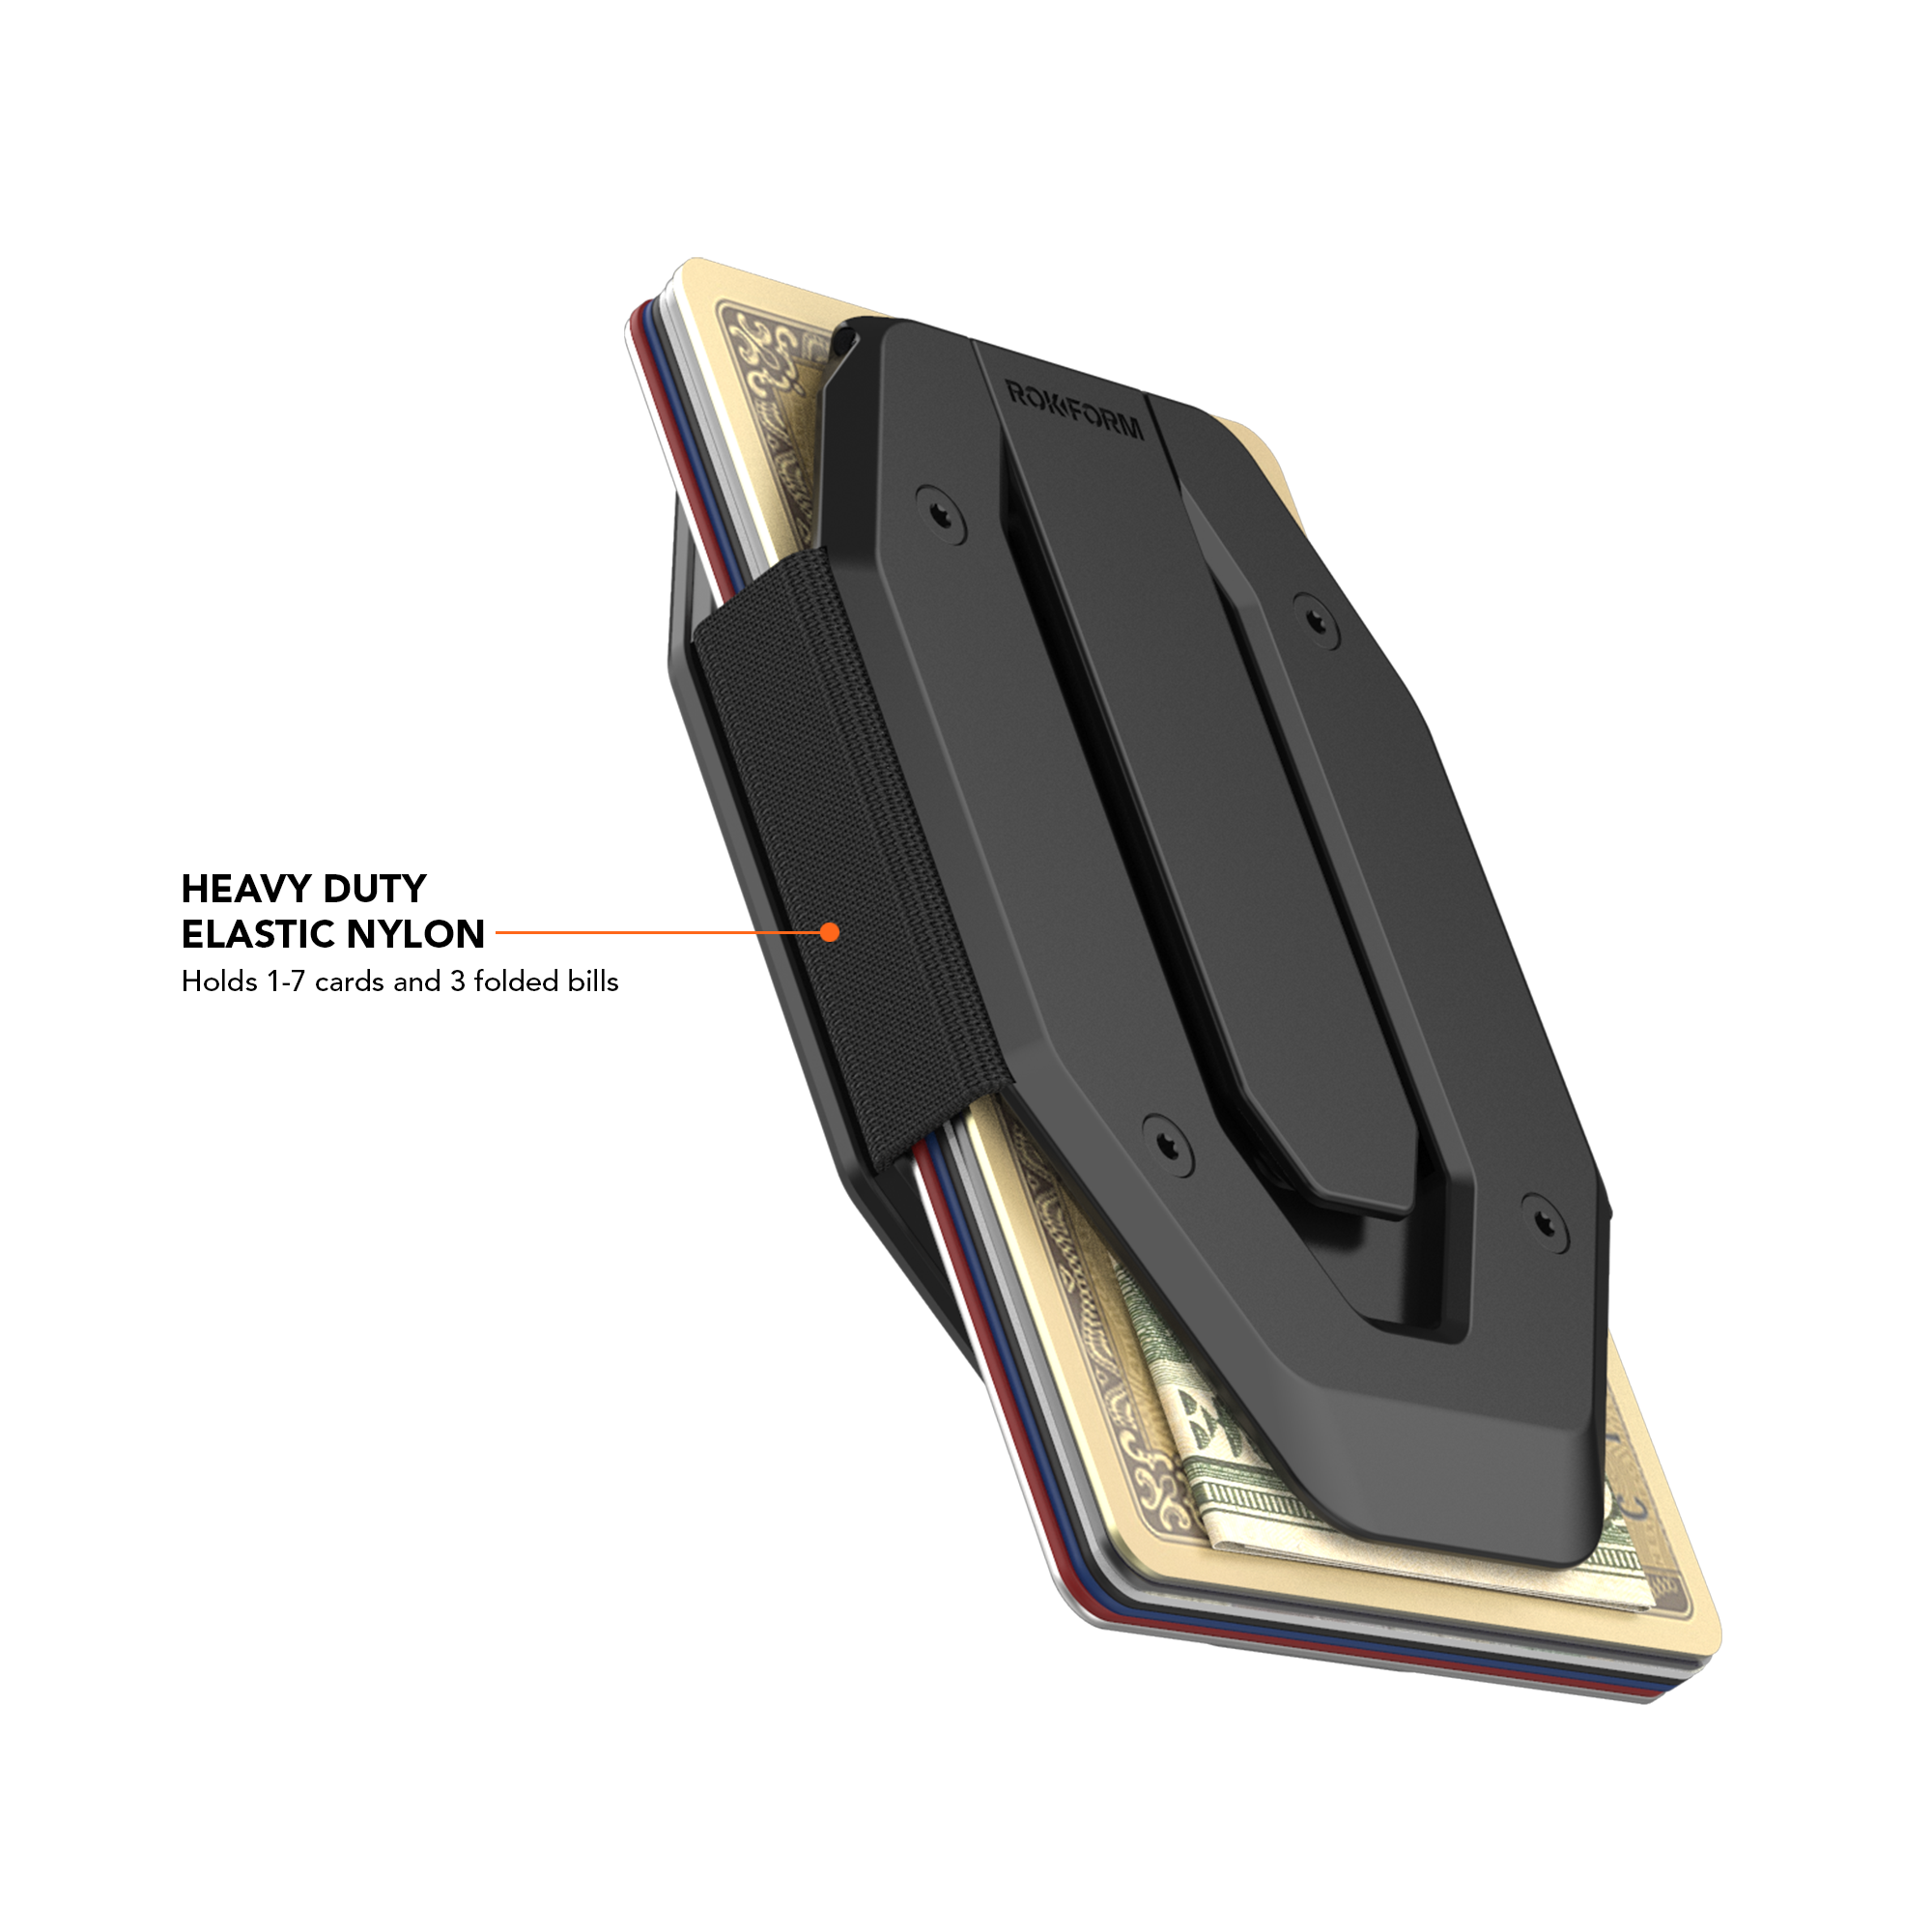 FUZION MAGNETIC MAGMAX™ WALLET with Stand - MAGSAFE® Compatible